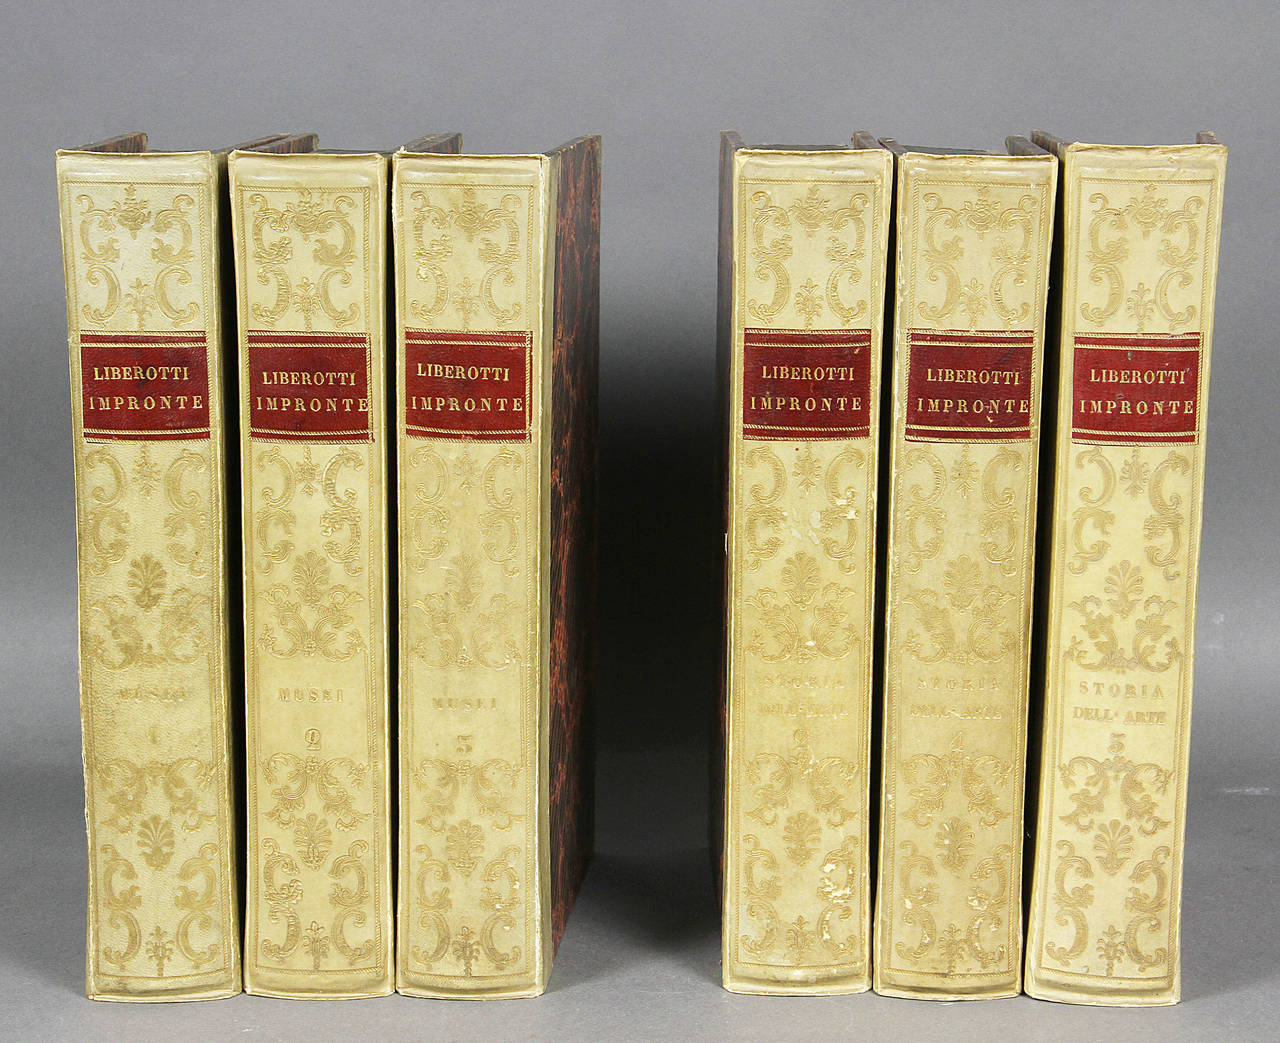 All in book form, one set of six titled Musei, set of three Storia Dell ' Arte. Vellum spines with marbles boards, hand written titles inside each volume.